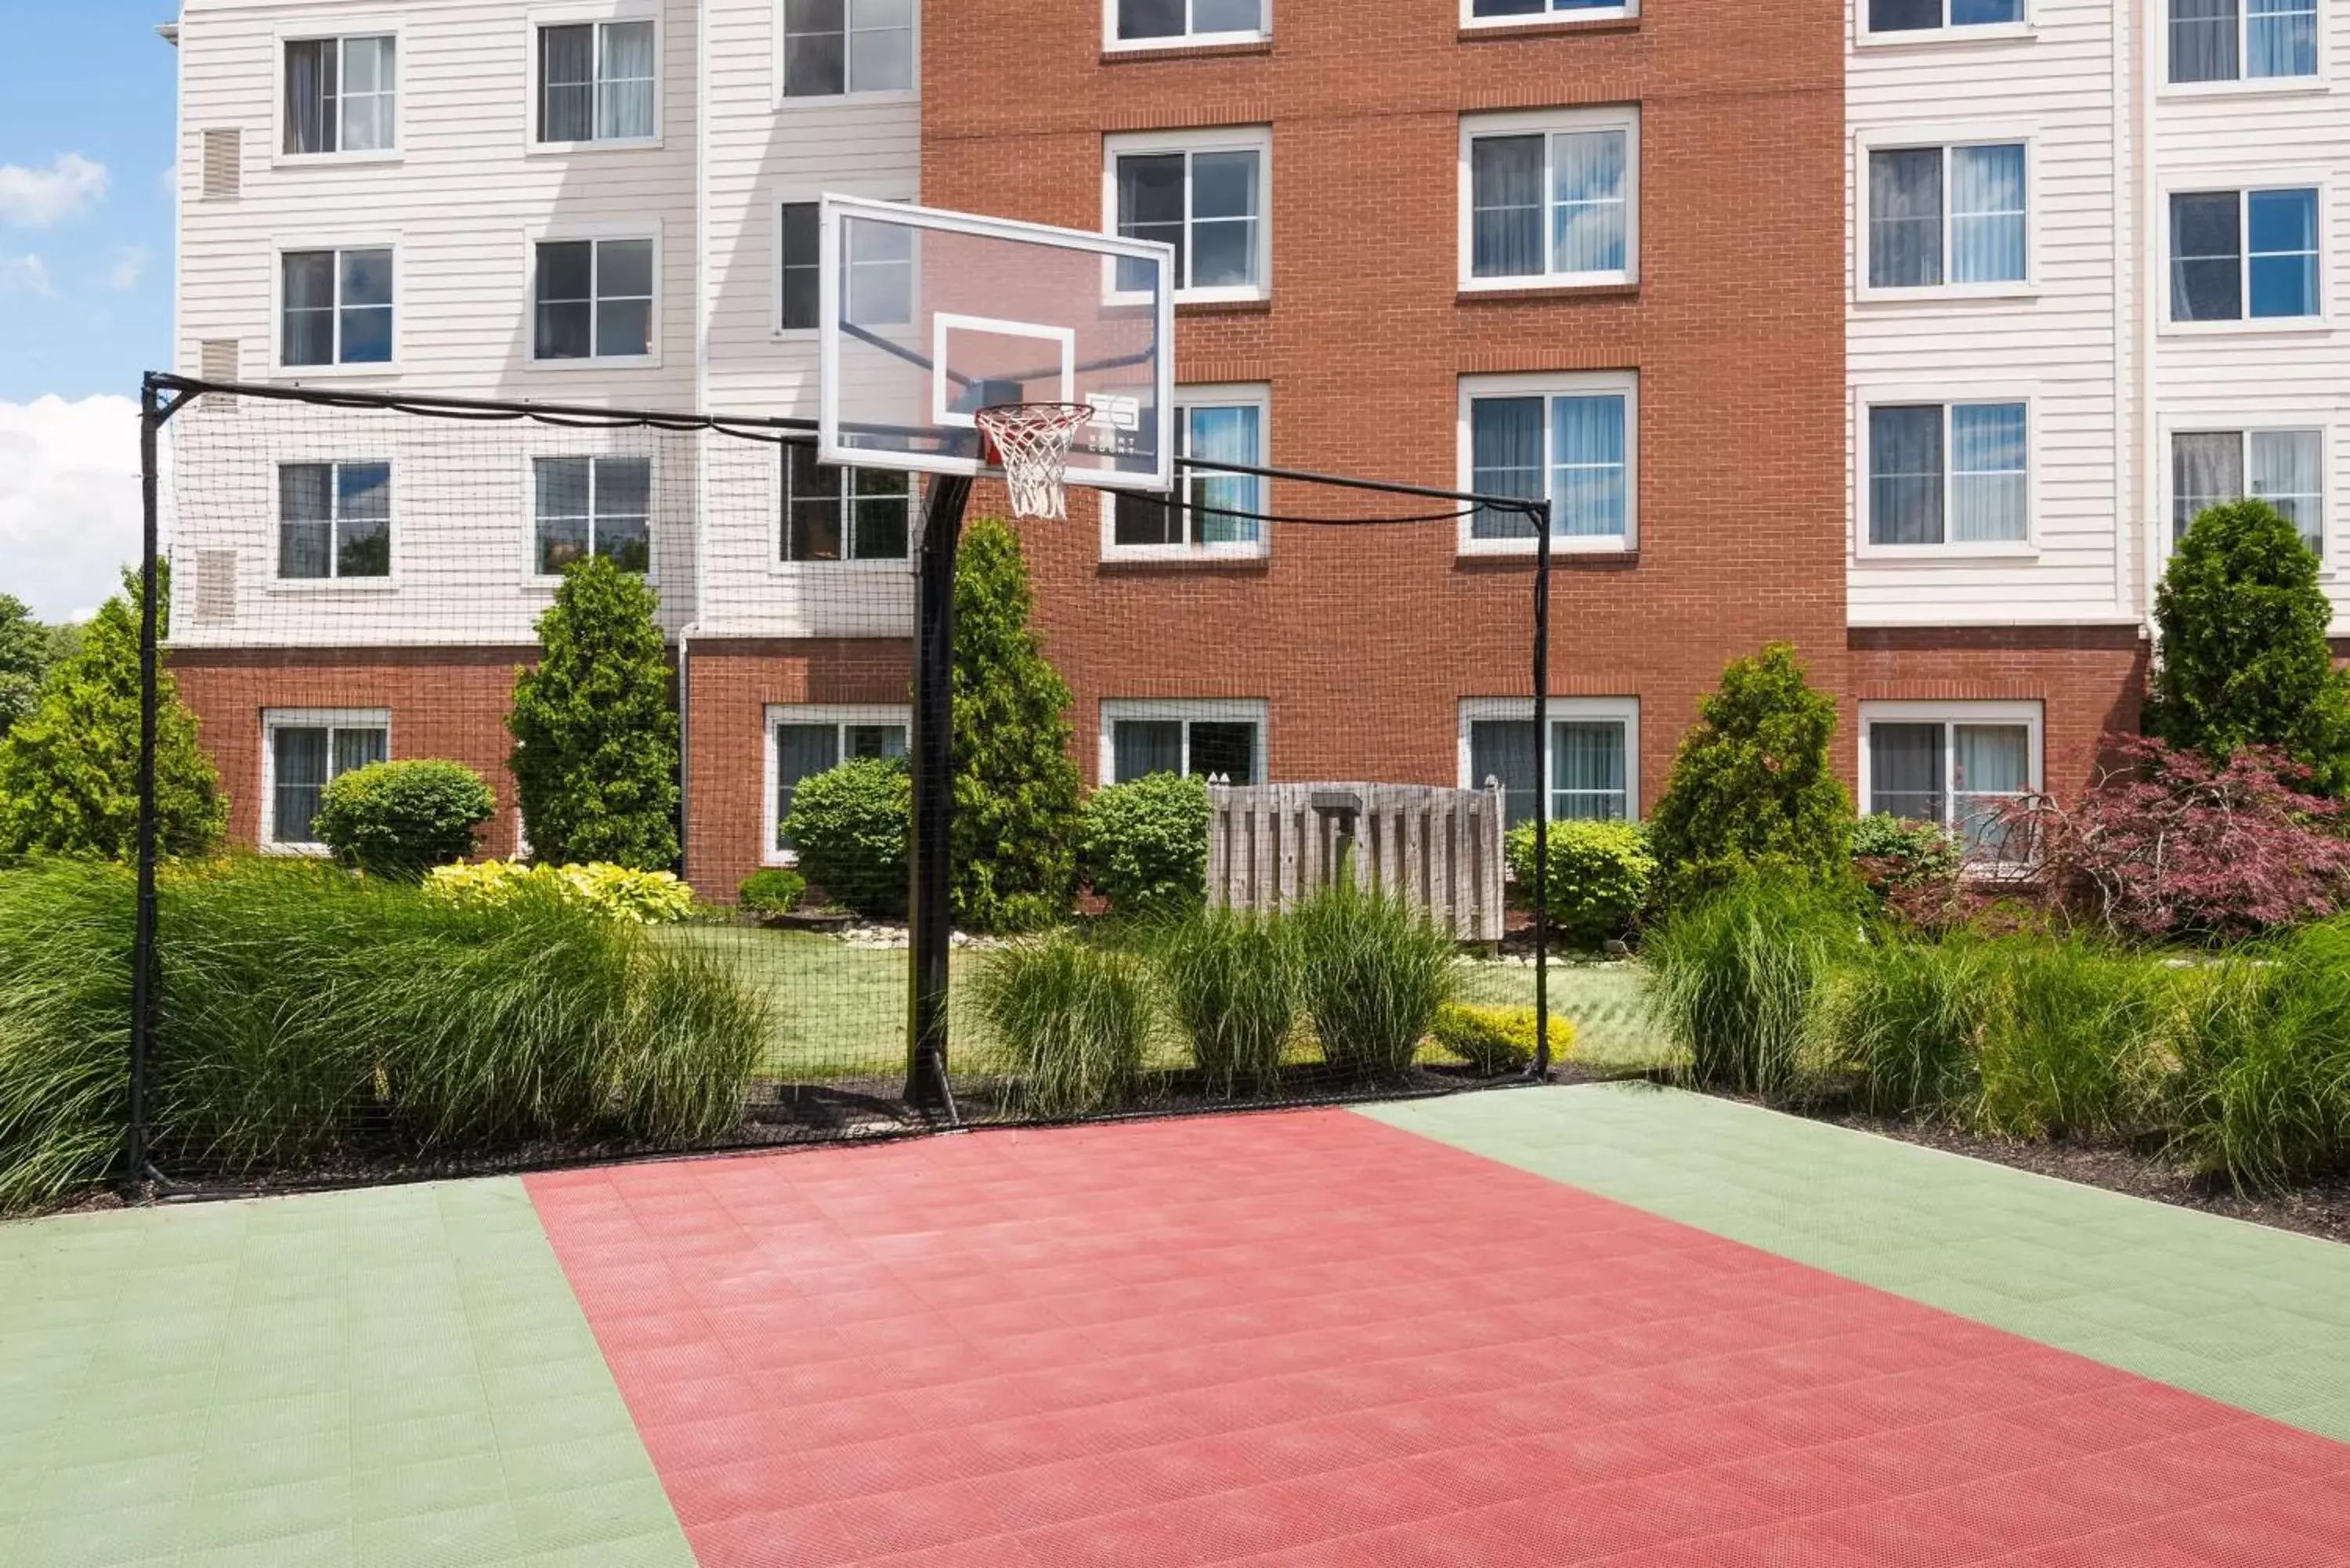 Sports, Property Building in Homewood Suites by Hilton Buffalo-Amherst